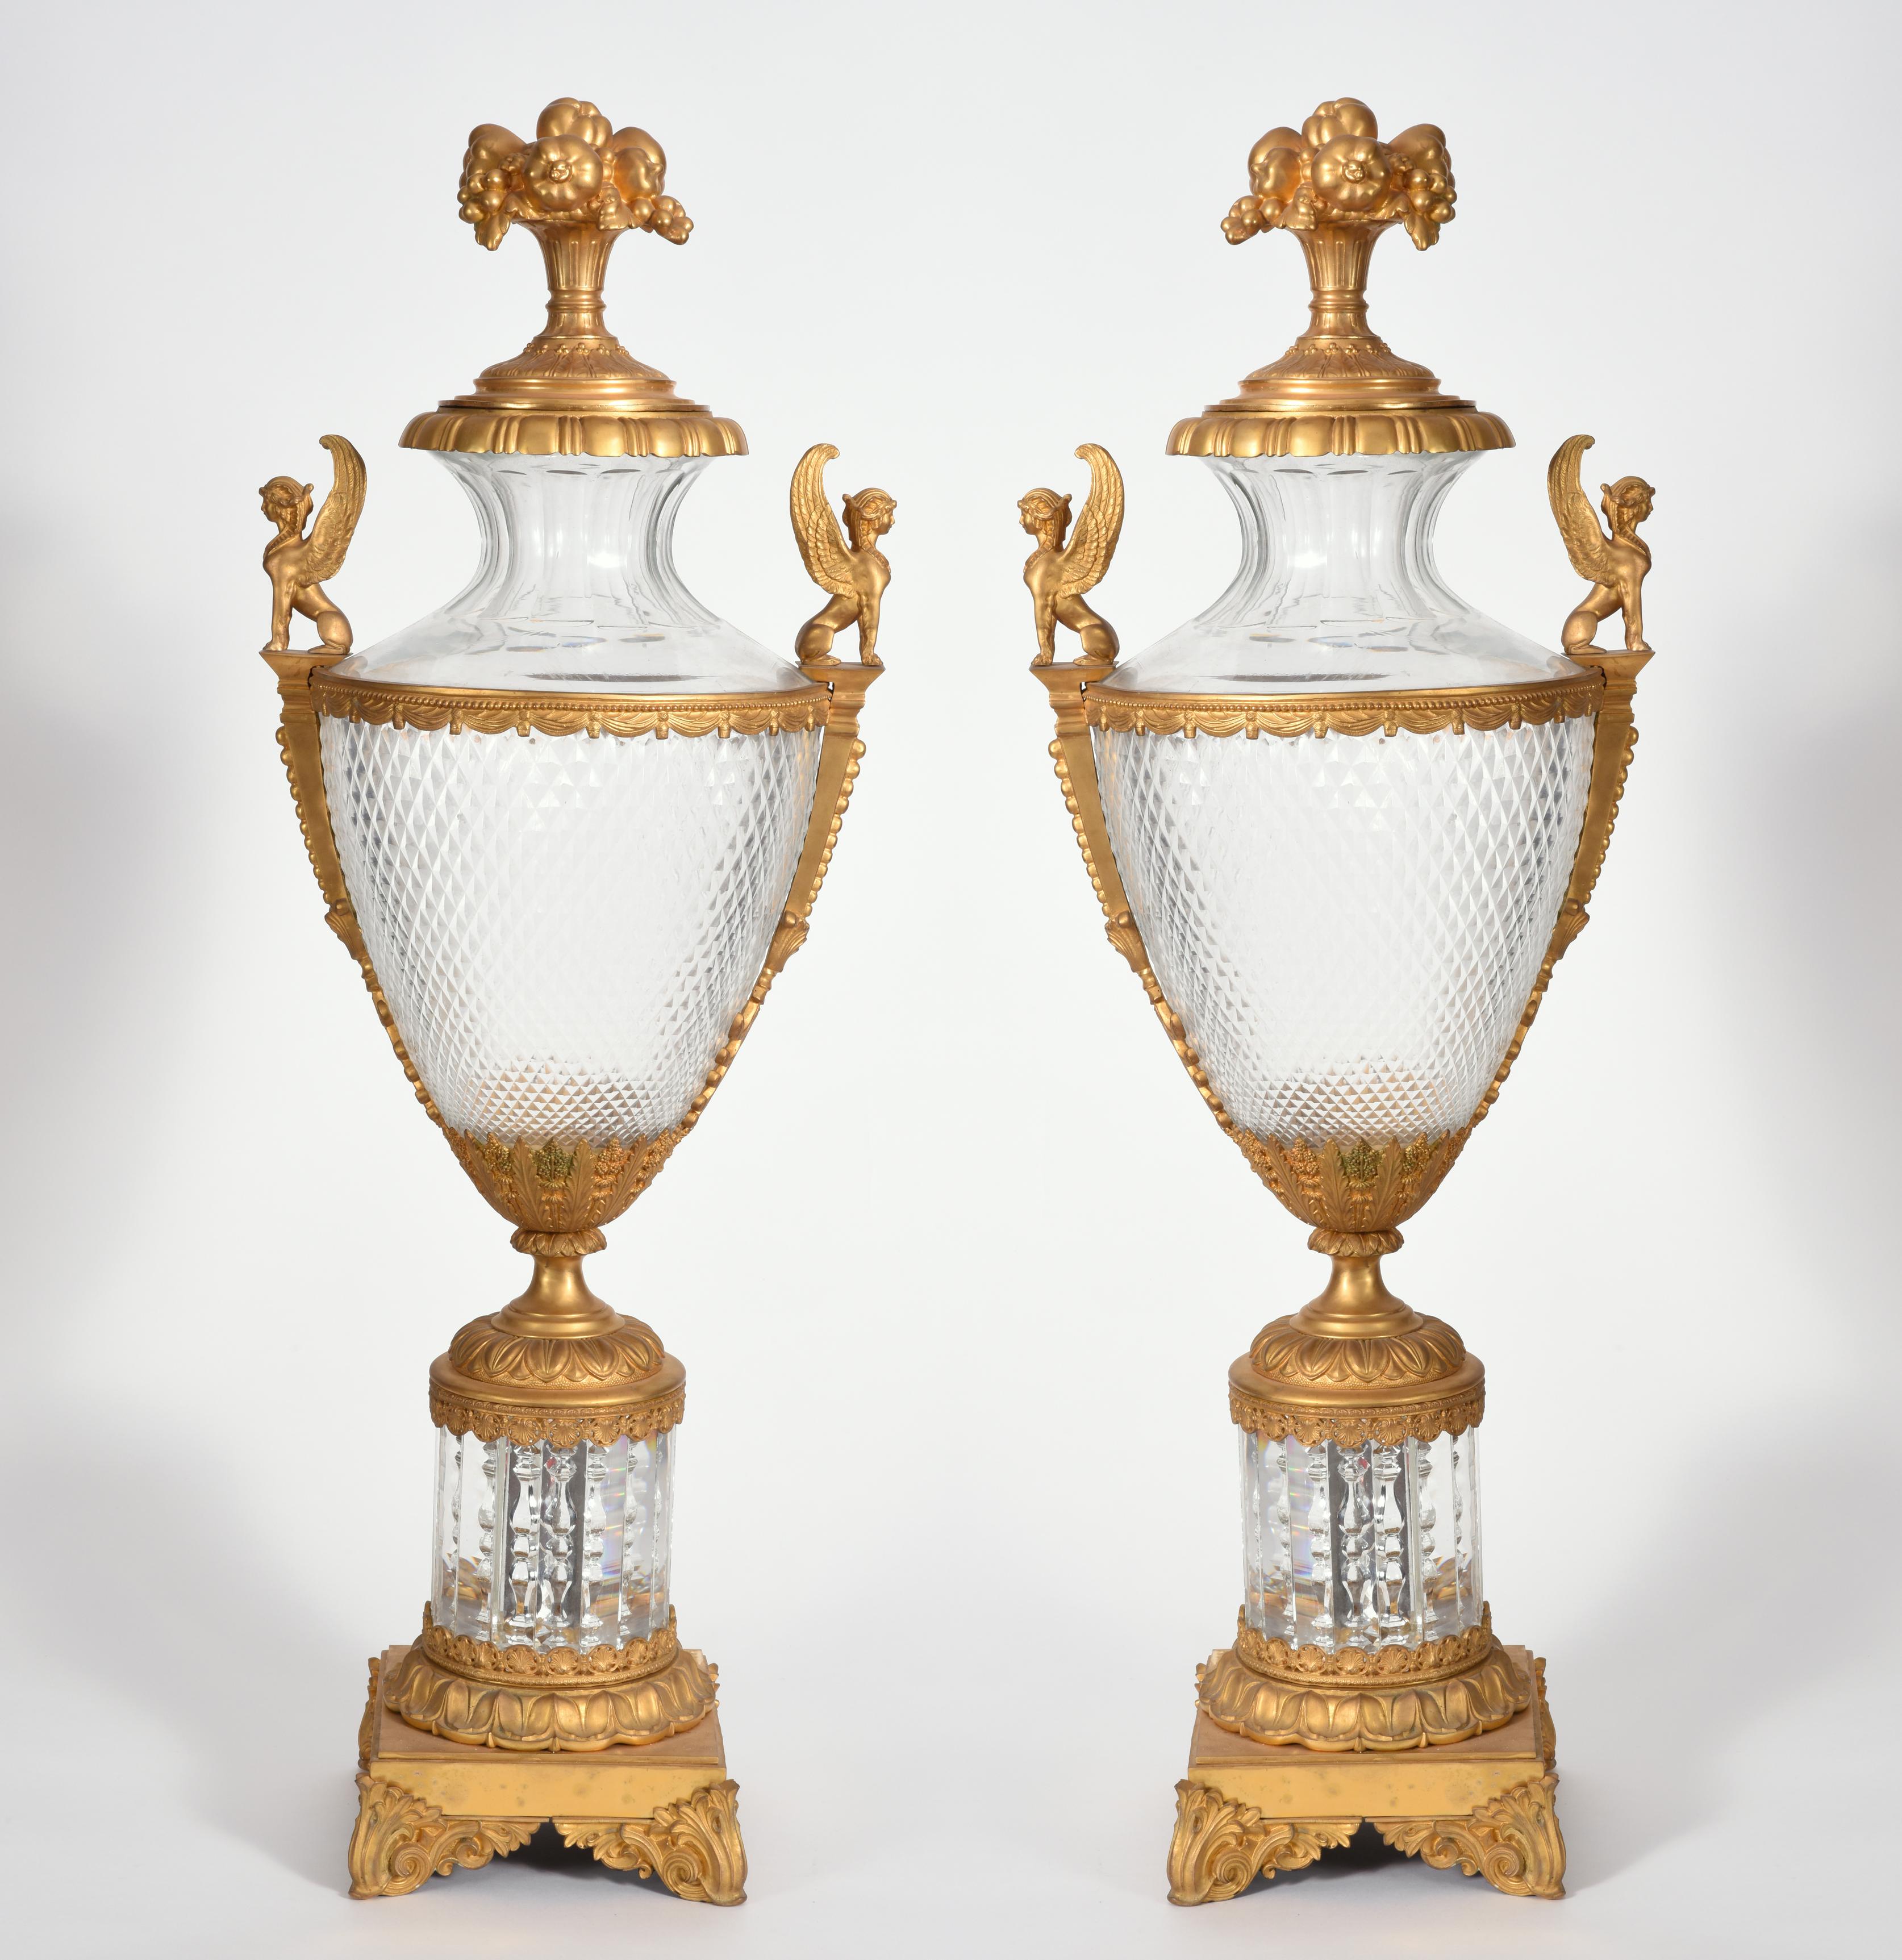 French Mid-19th Century Large Matching Pair of Bronze or Cut Glass Urns